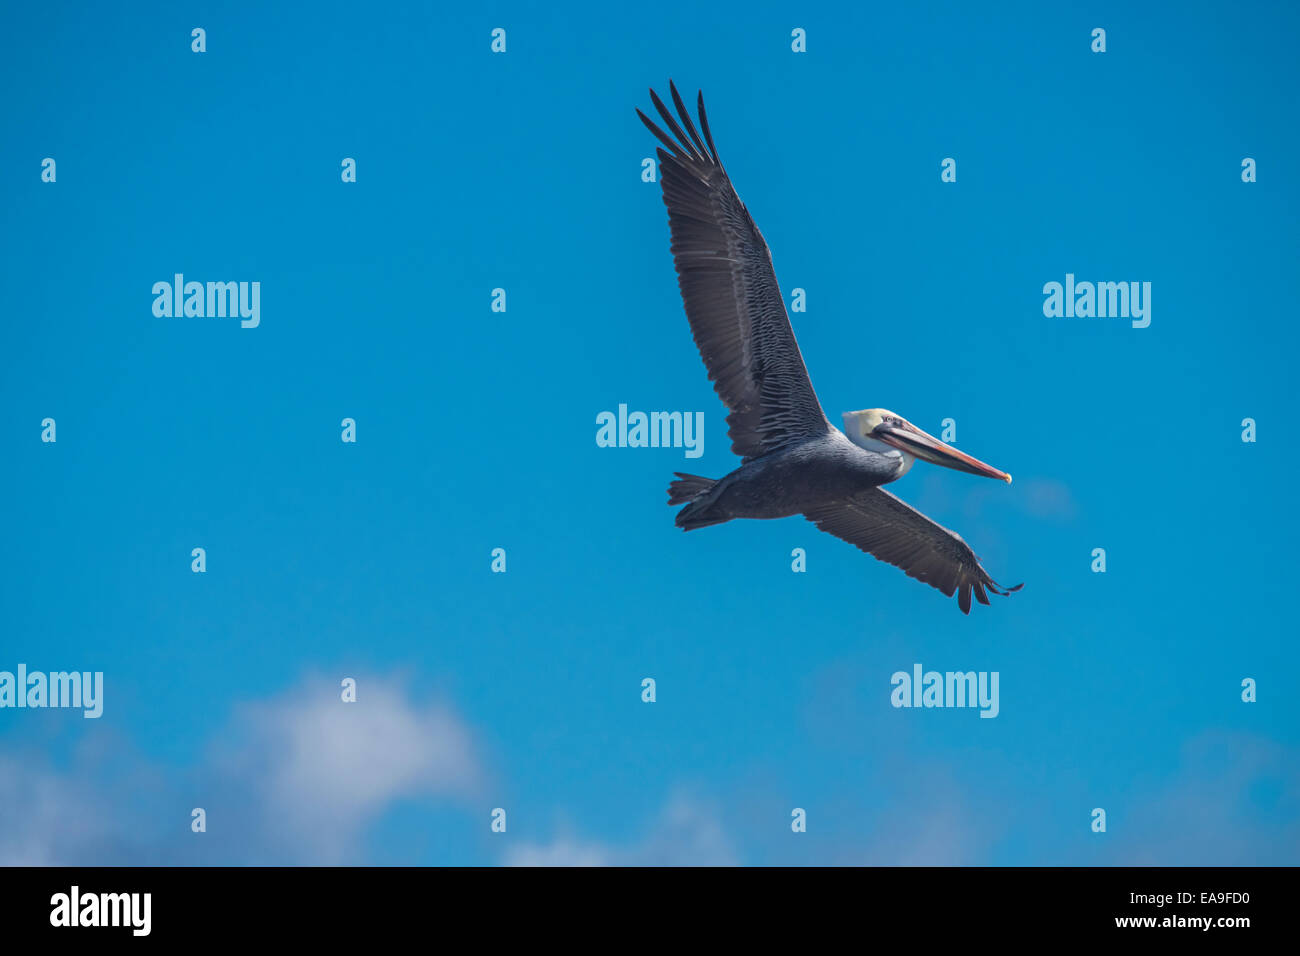 California Brown Pelican in flight on a blue sky. Stock Photo